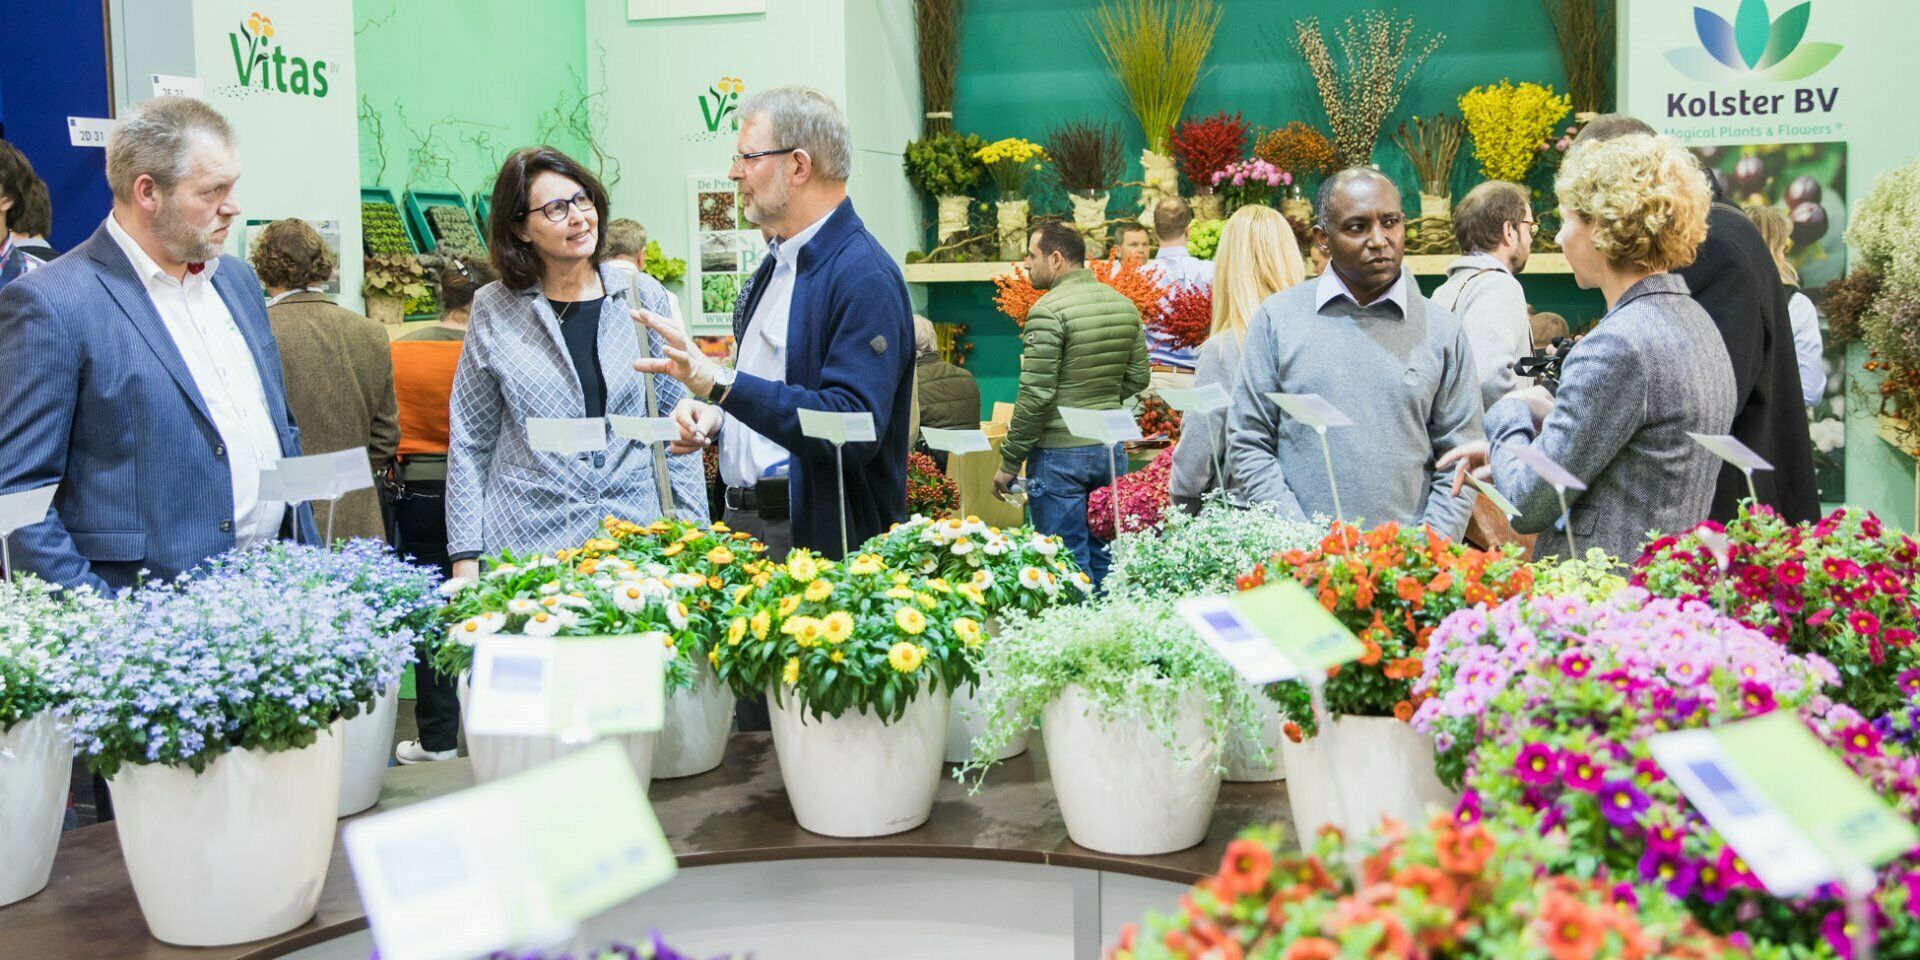 IPM 2018 Essen - the leading horticultural exhibition is getting stronger